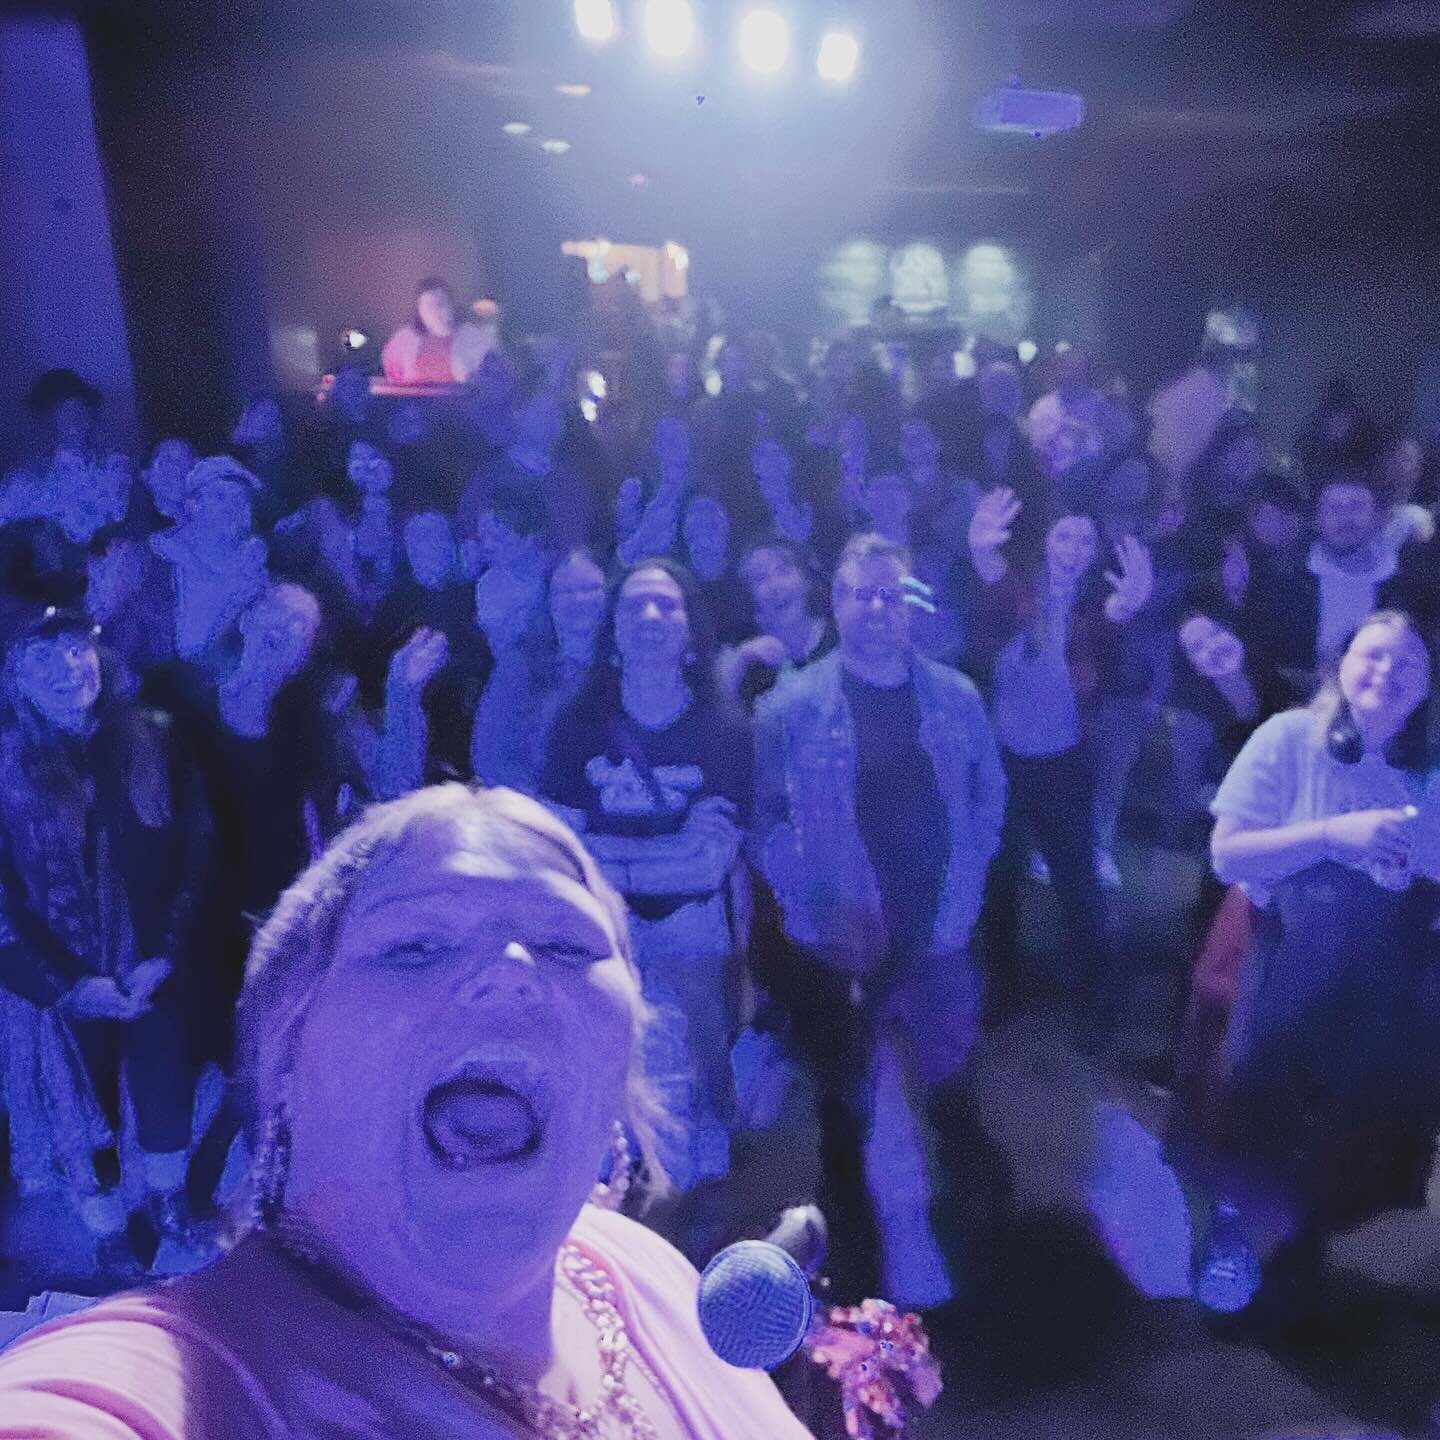 Last night&rsquo;s show was absolutely un.be.liev.a.ble!!!!!!!!!

I am truly overwhelmed with thankfulness and joy for the magical night we all shared together. There was laughter, music, joy, dancing, tears, bubbles, encouragement and just pure stup